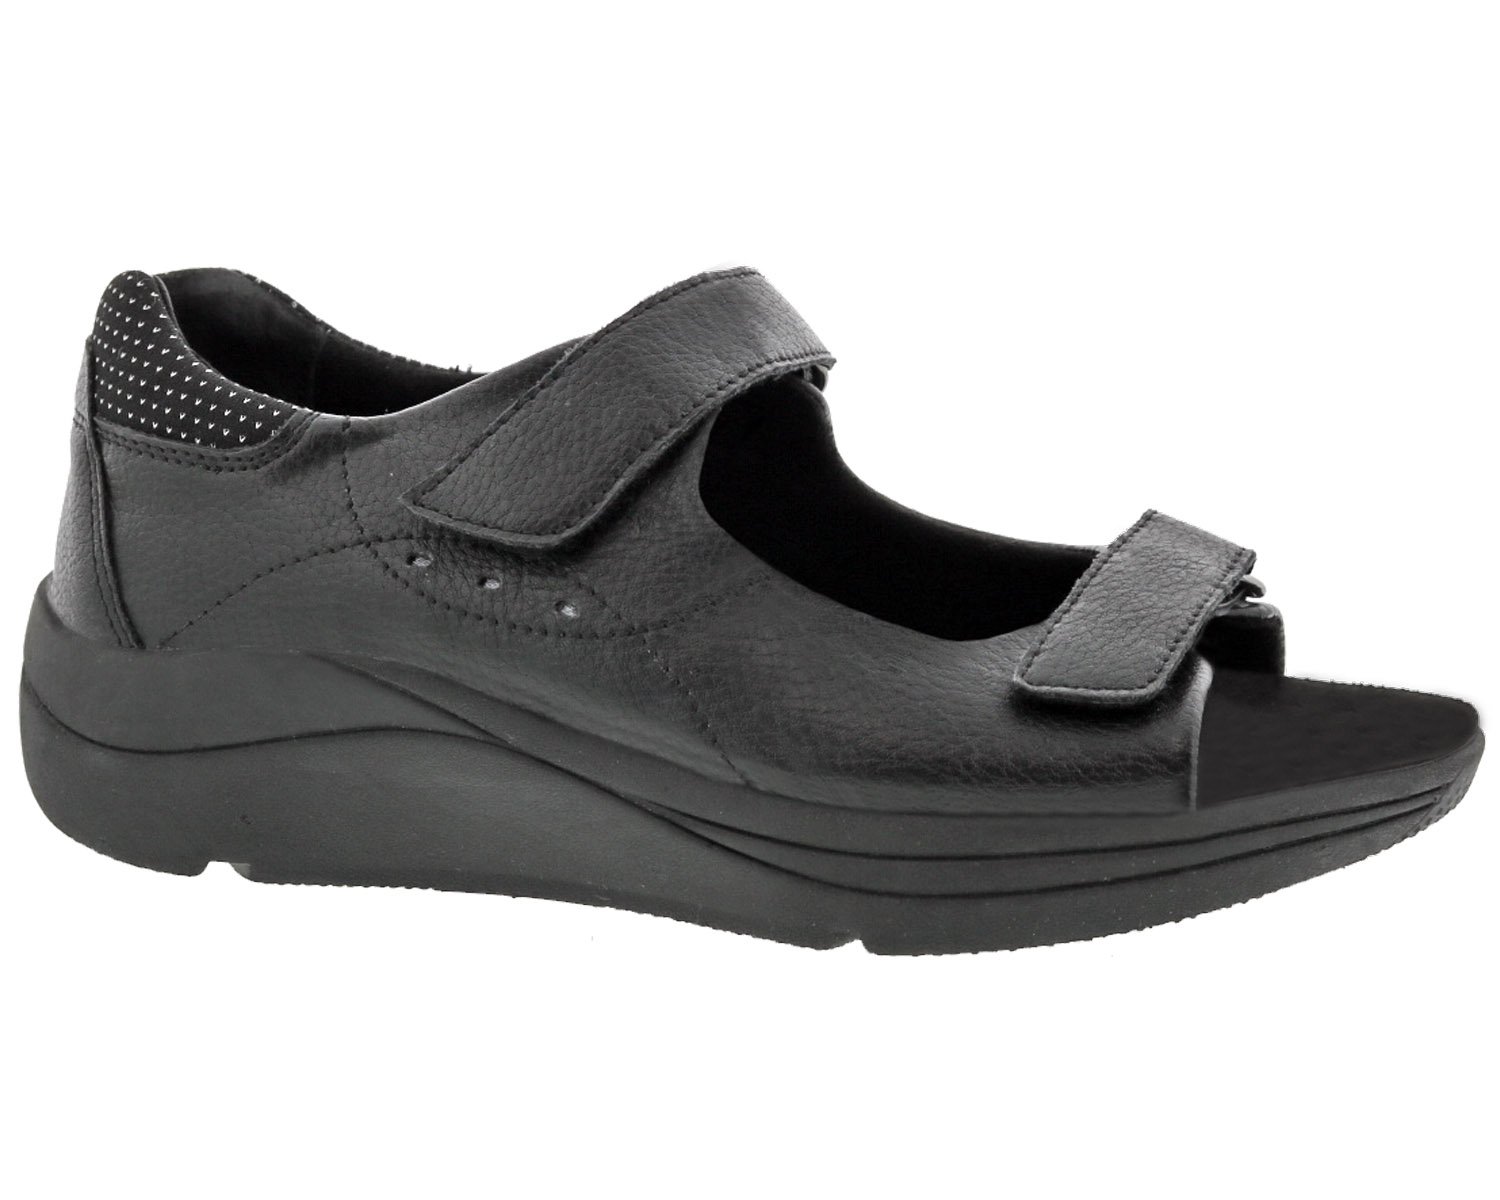 Drew Shoes Shasta 17206 - Women's Sandal - Casual Comfort Therapeutic Sandal - Removable Footbeds - Wide